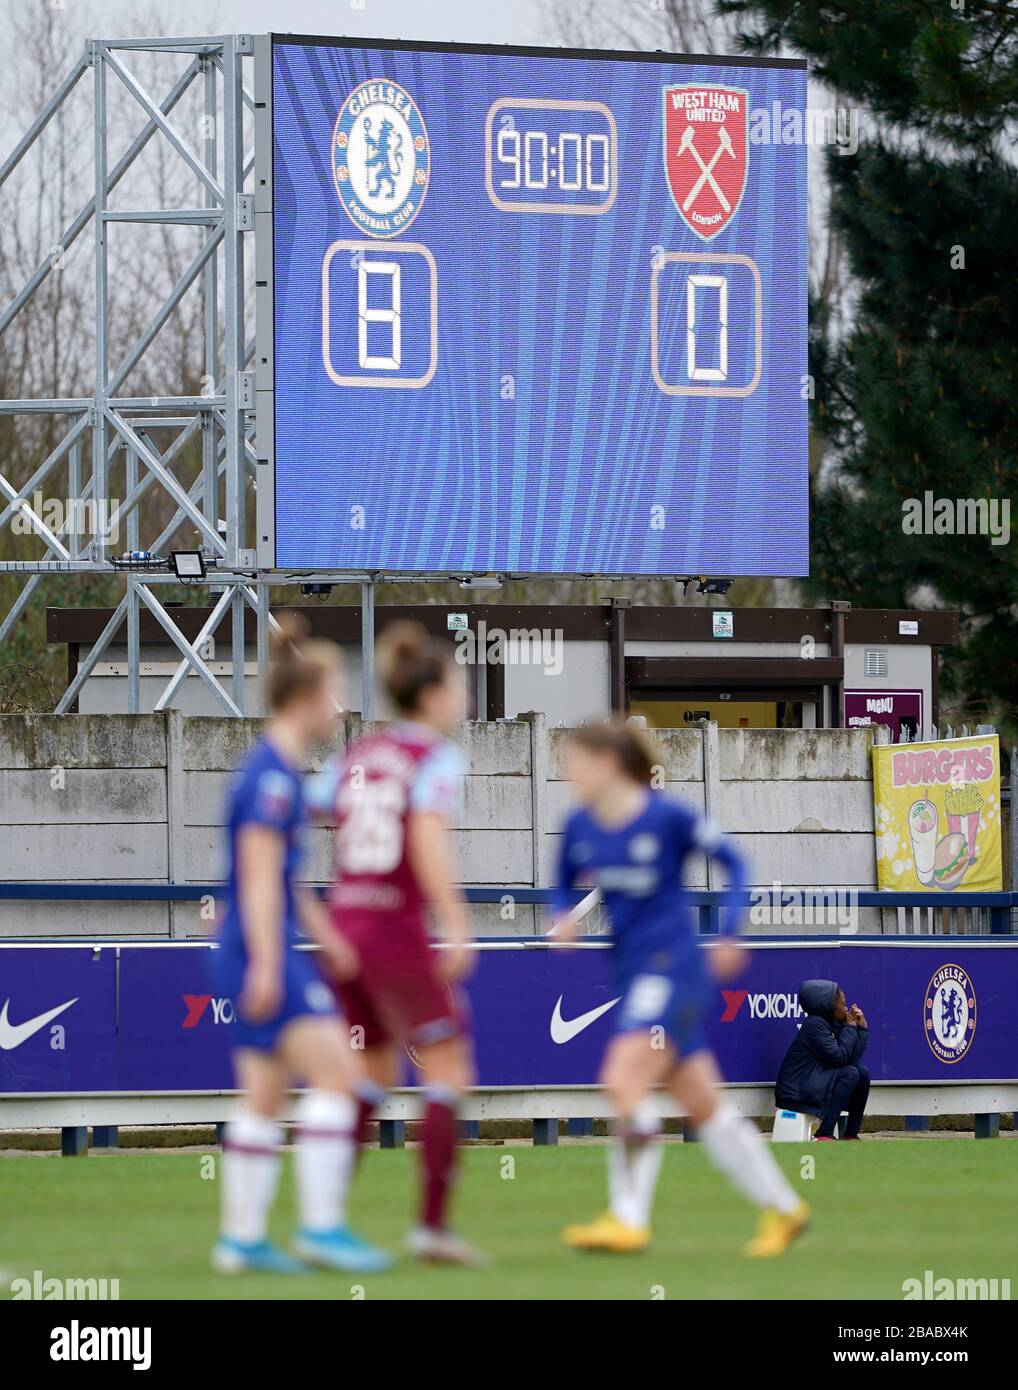 The scoreboard showing Chelsea's 8-0 win over West Ham Stock Photo